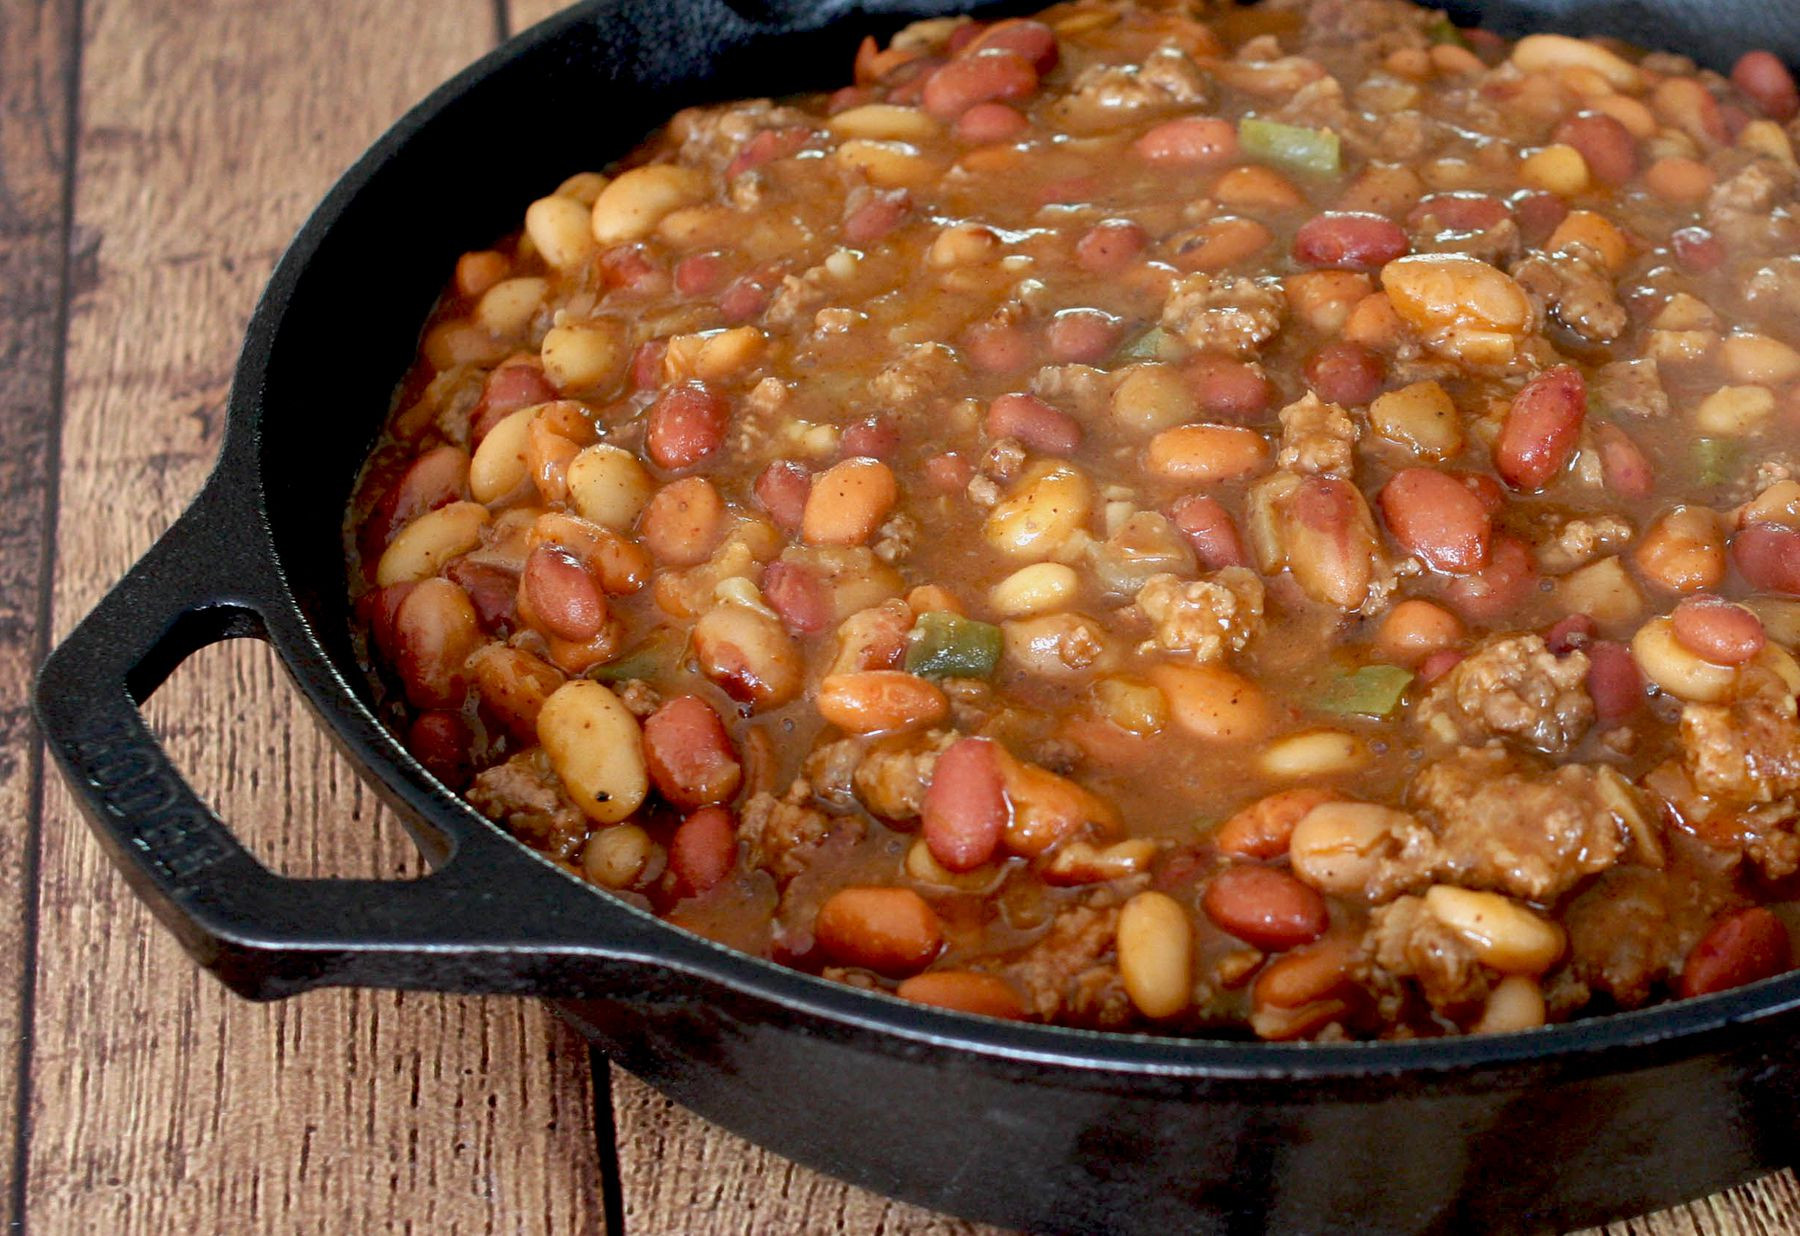 Pinto Beans And Ground Beef Recipe Slow Cooker
 Slow Cooker Calico Beans With Bacon and Ground Beef